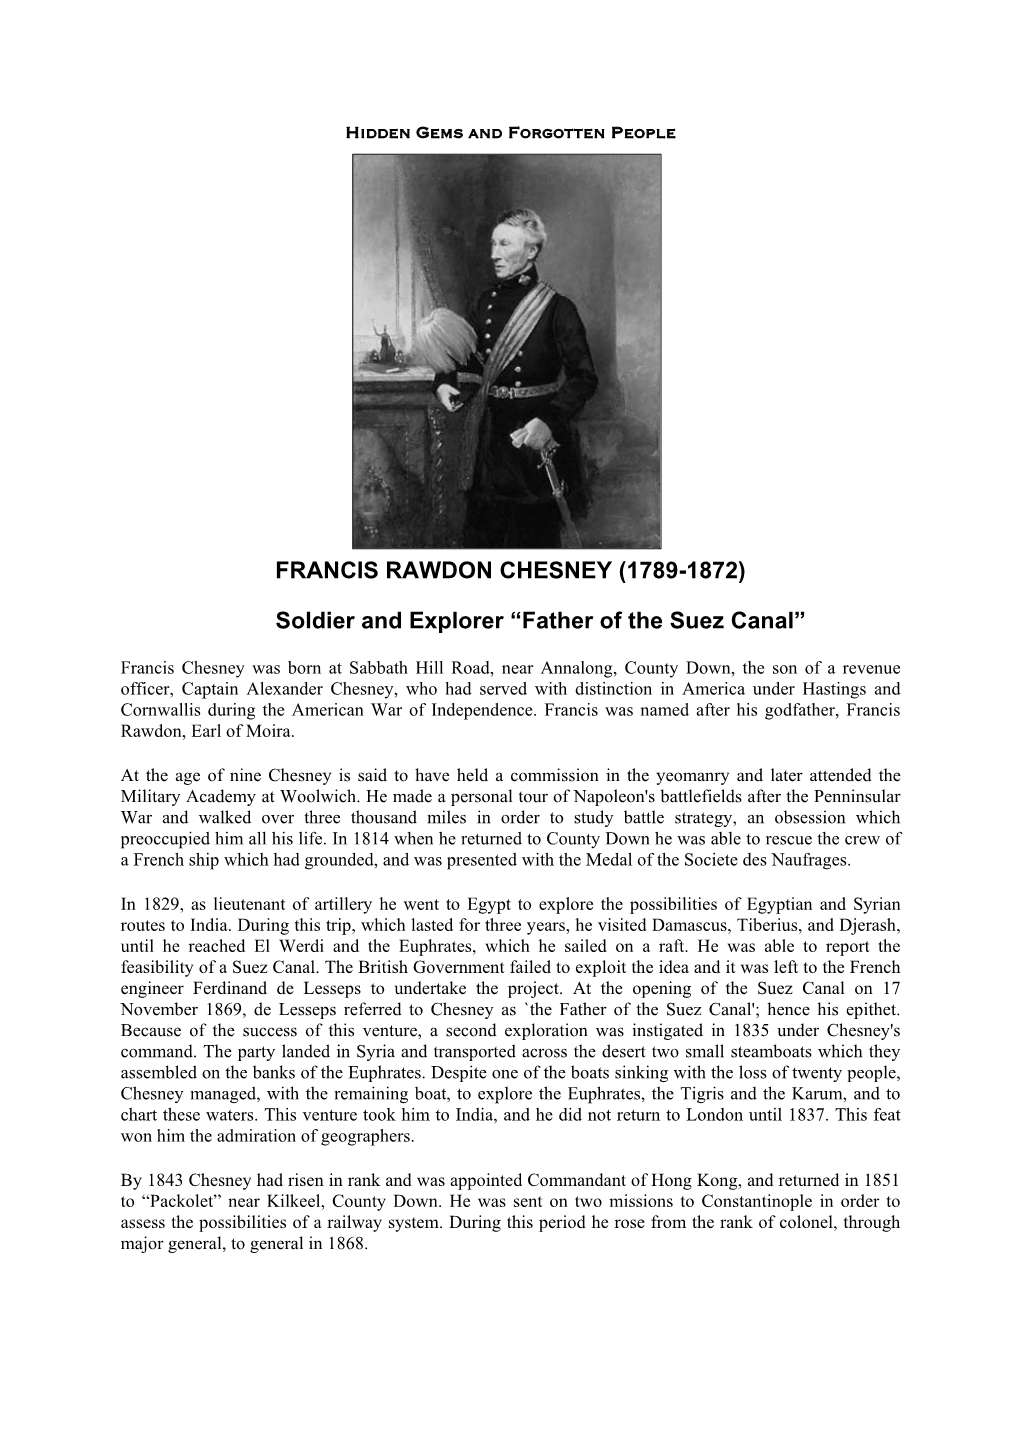 FRANCIS RAWDON CHESNEY (1789-1872) Soldier and Explorer “Father of the Suez Canal”